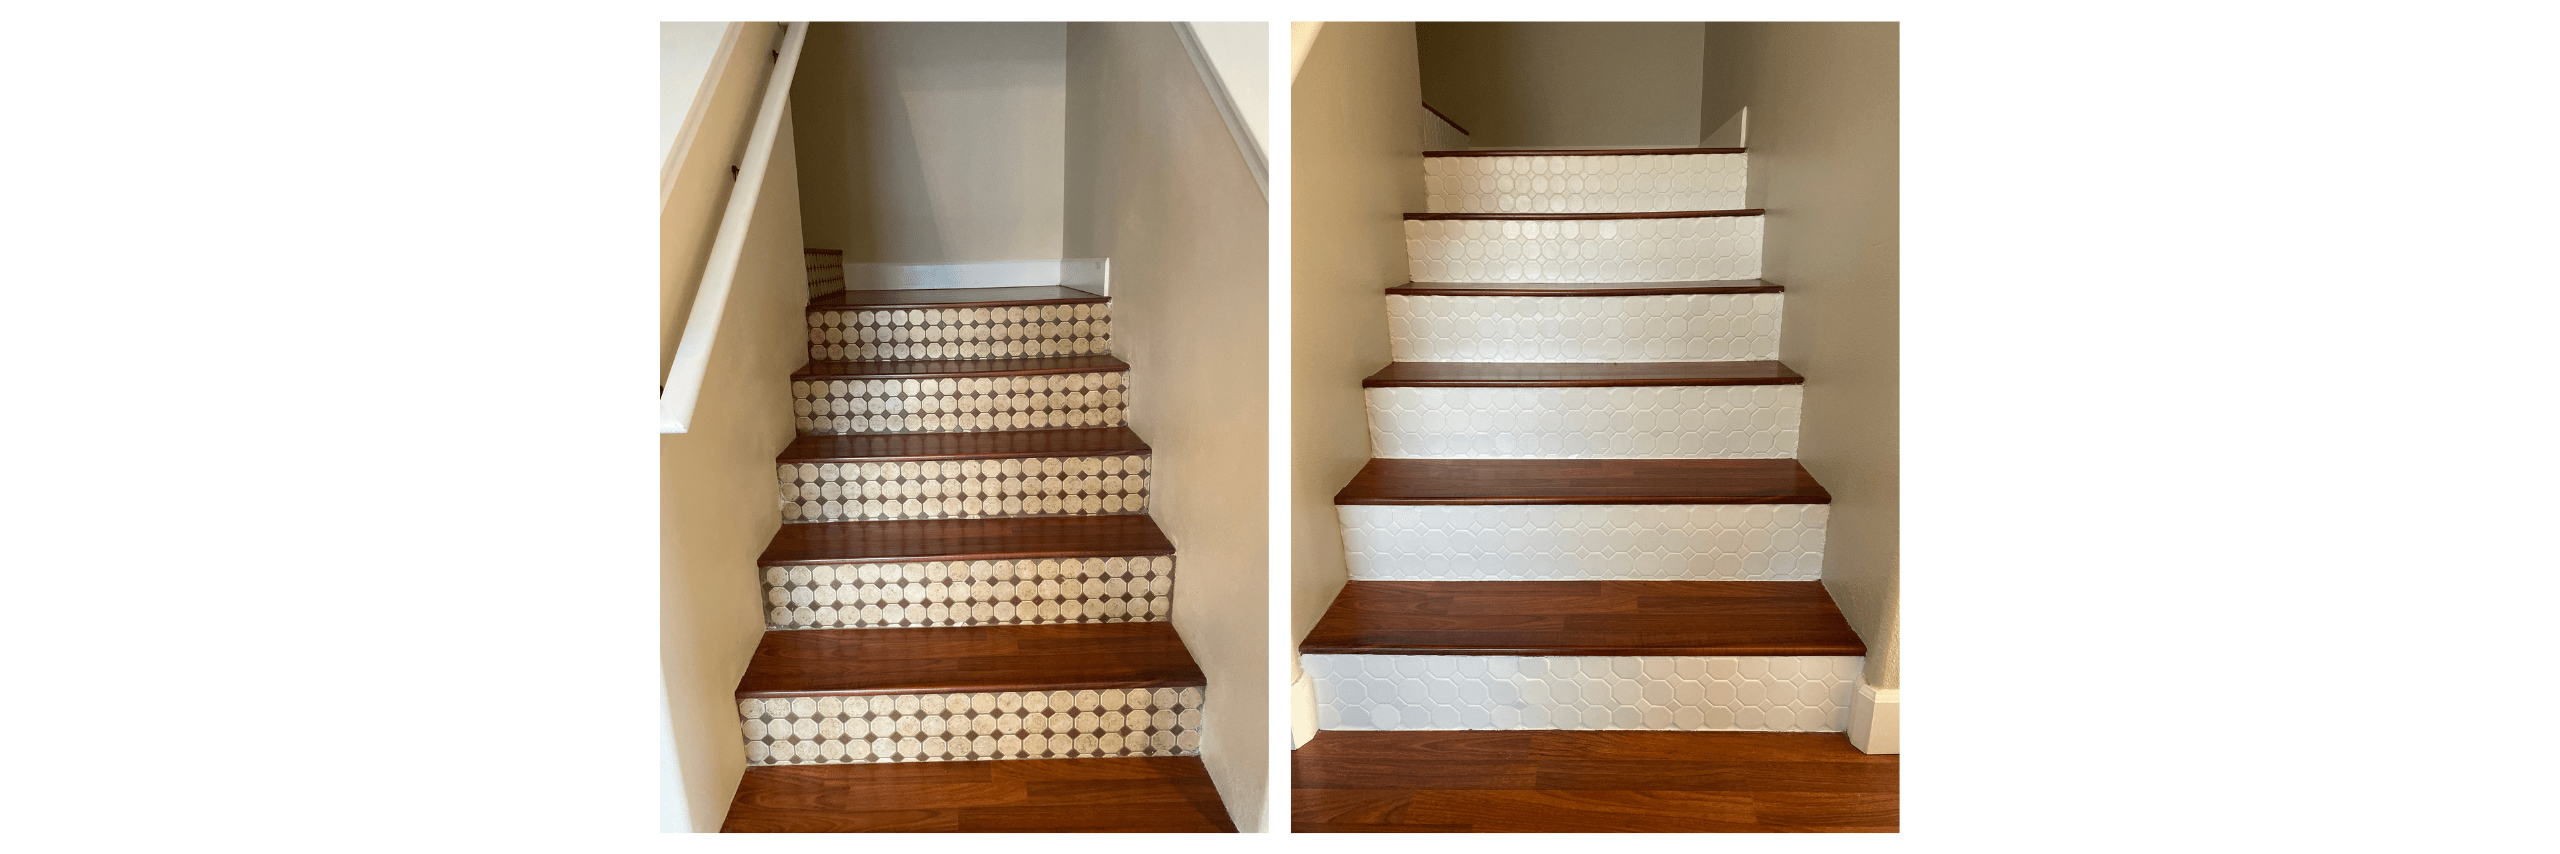 Before and After Staircase Makeover